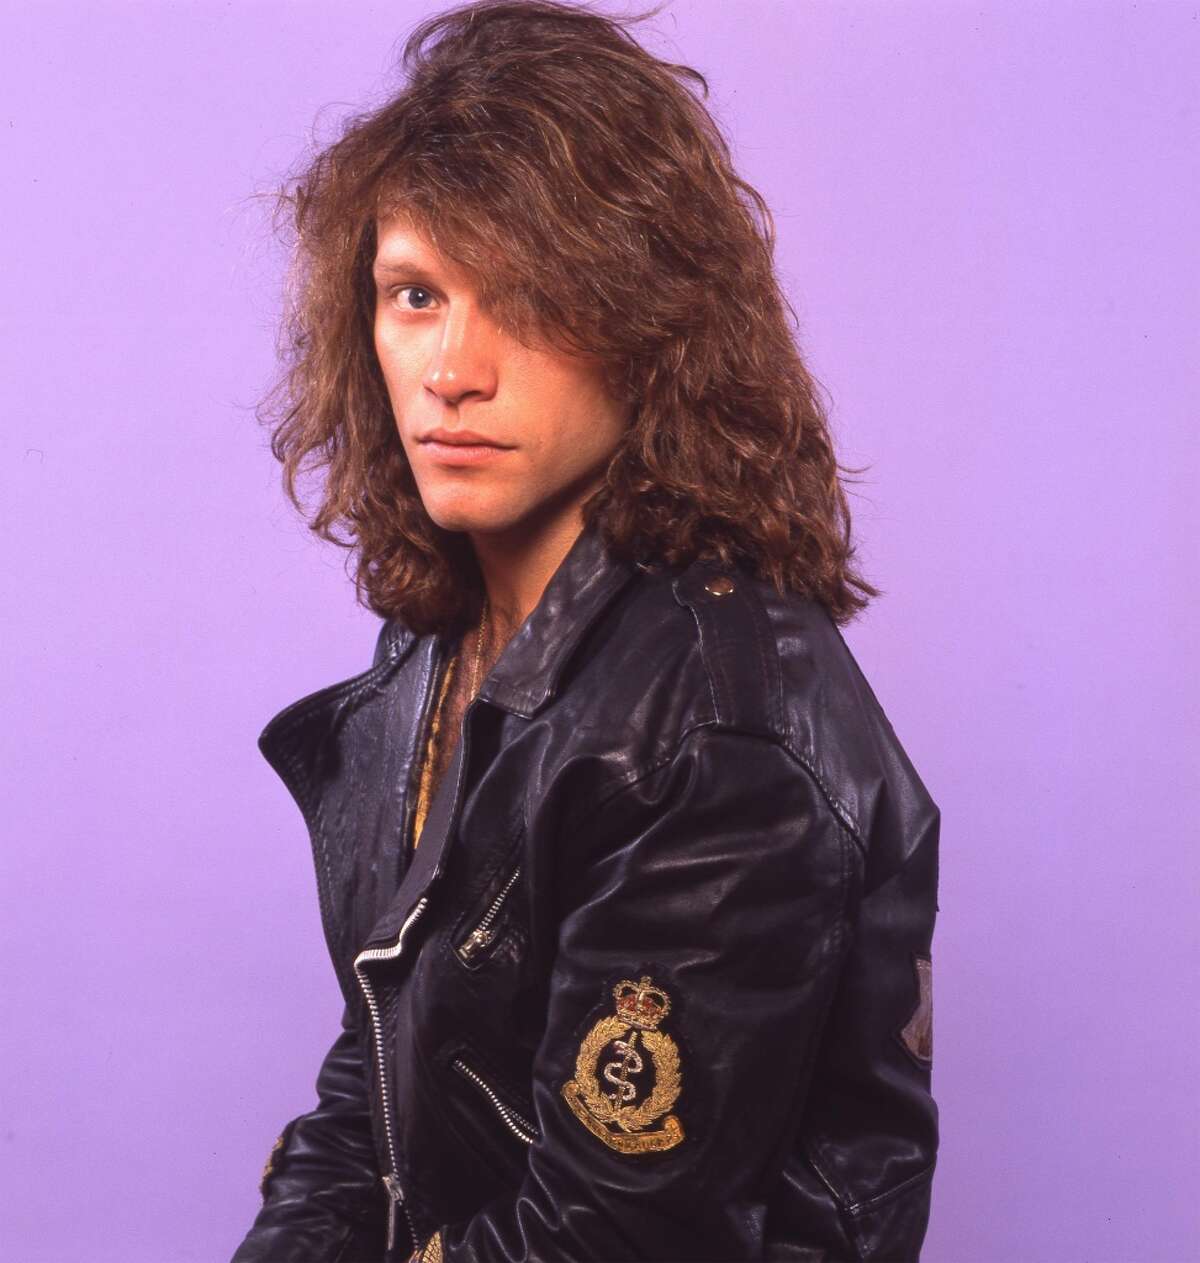 Jon Bon Jovi shot through the heart of women of all ages with his long lock...